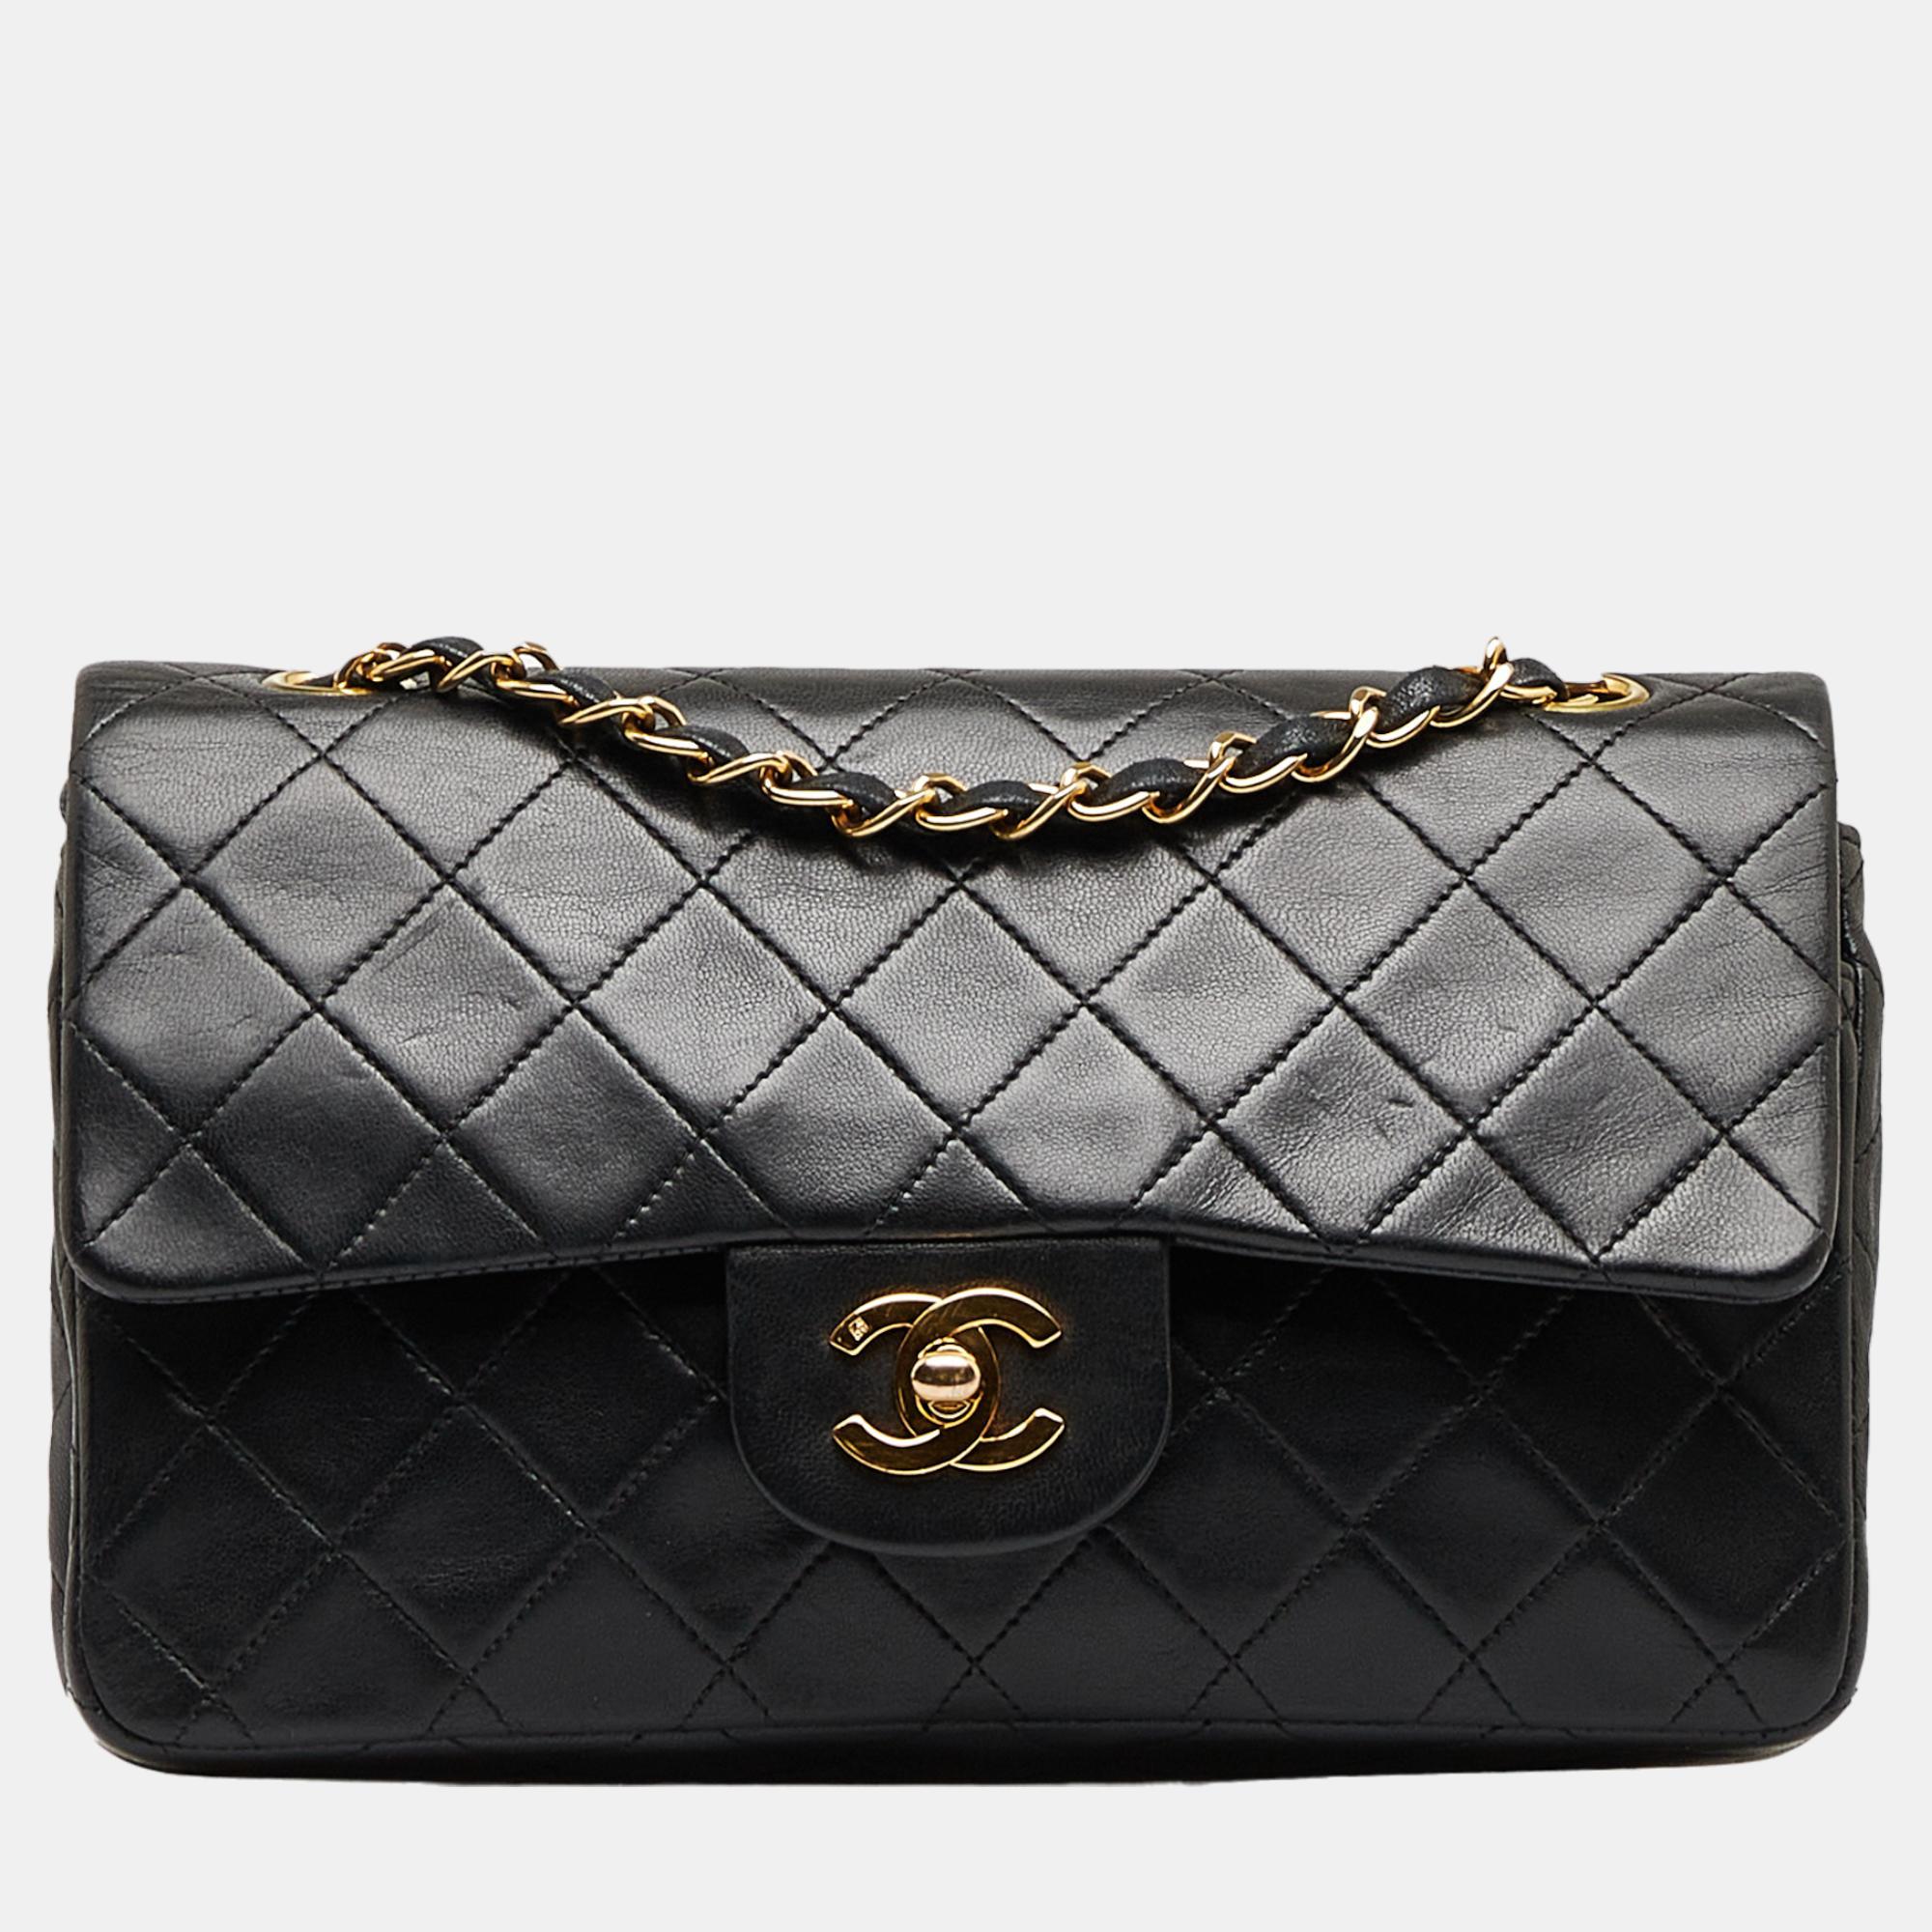 Chanel Black Small Classic Lambskin Double Flap Bag